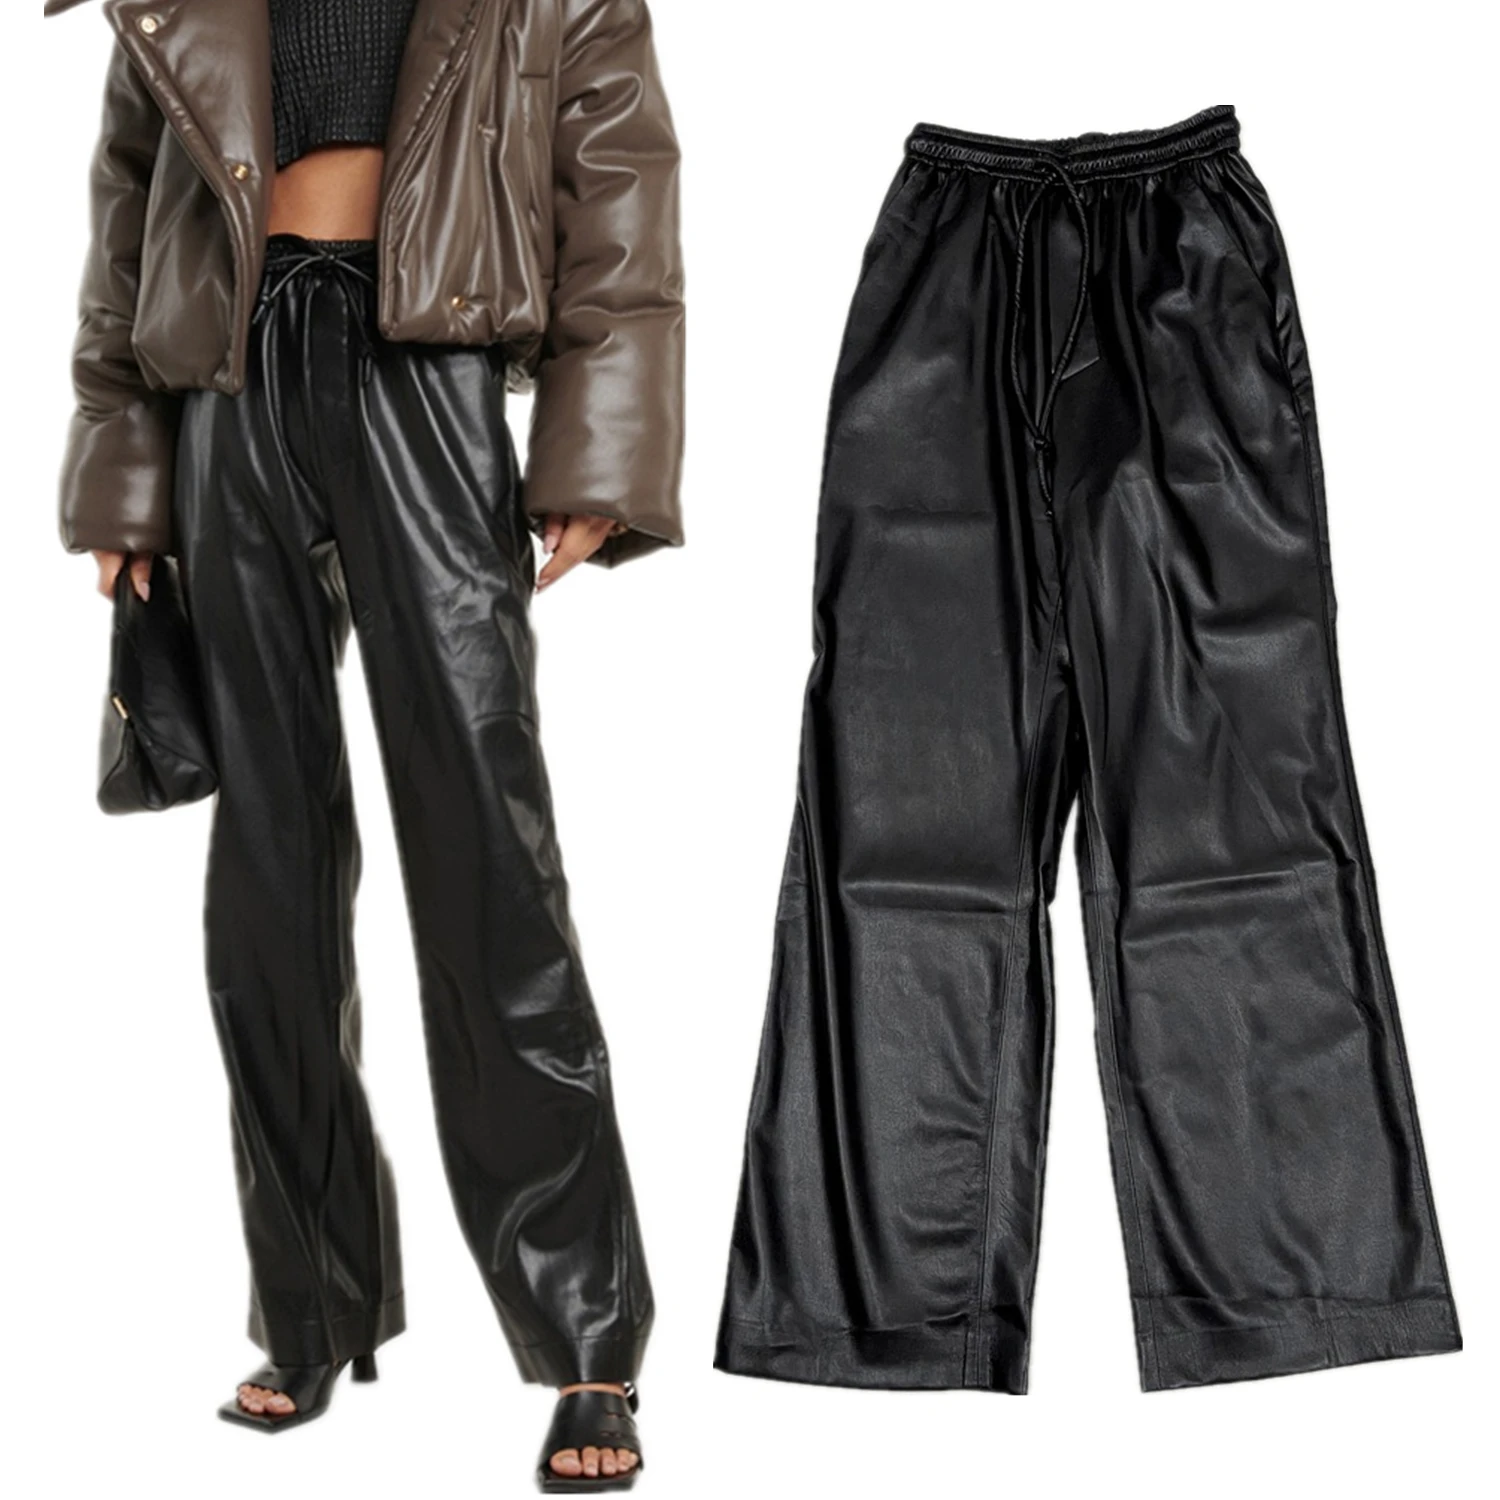 Withered Environmental Protection Leather Casual Pants High Street Fashion Retro Drawstring Loose Harem Leather Pants Women pumping paper private environmental protection pu leather ins tissue box creative simple restaurant